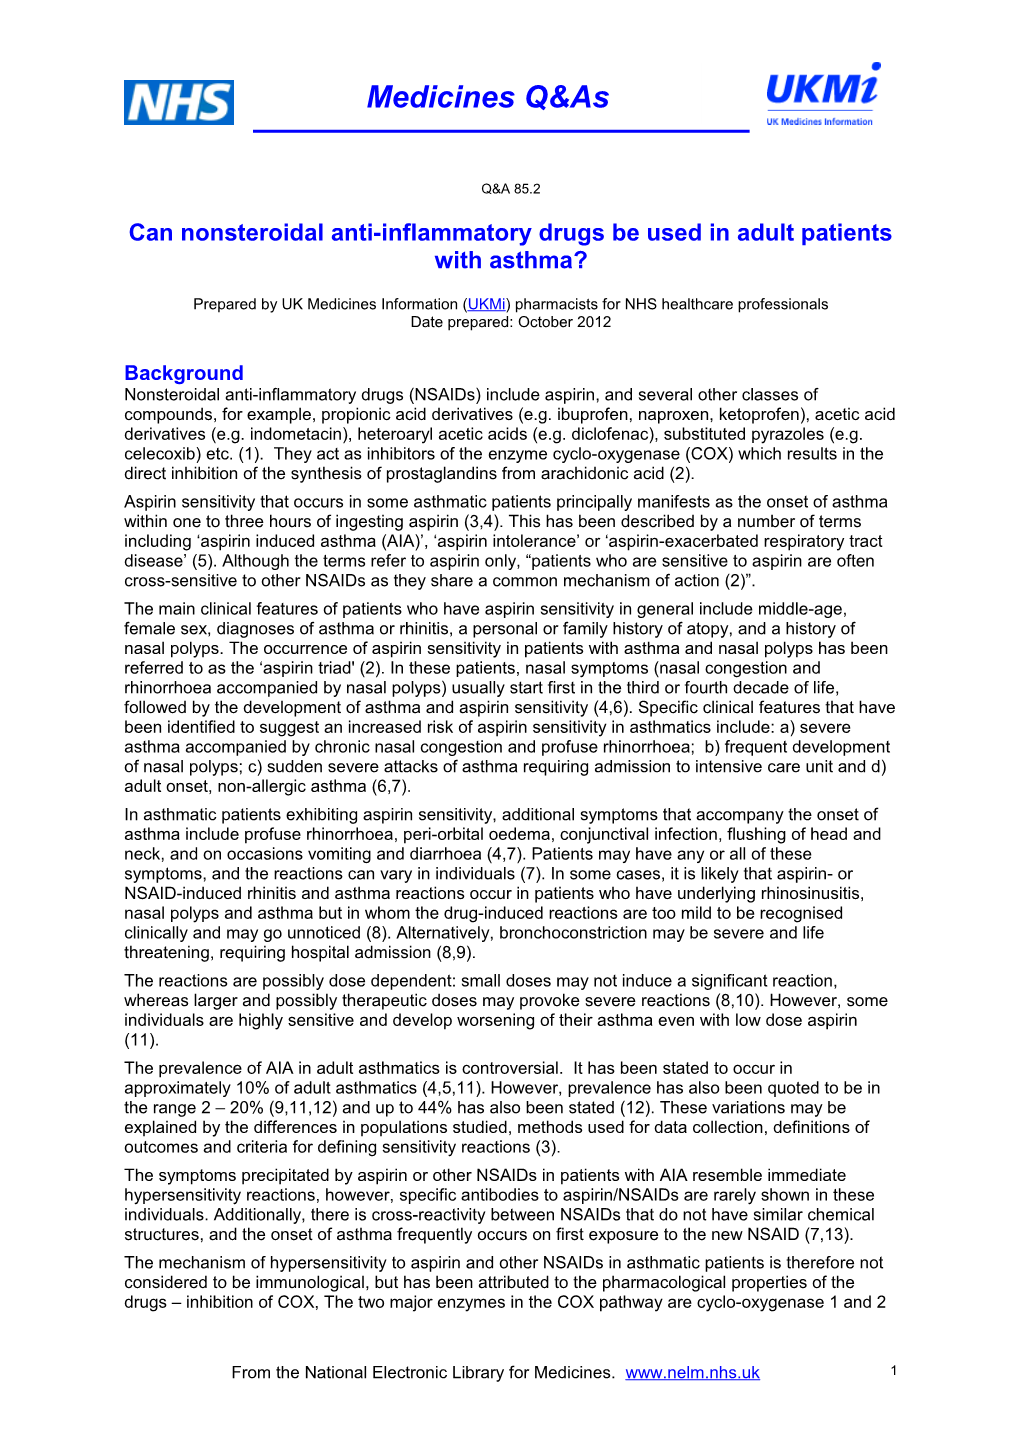 Can Nonsteroidal Anti-Inflammatory Drugs Be Used in Adult Patients with Asthma?